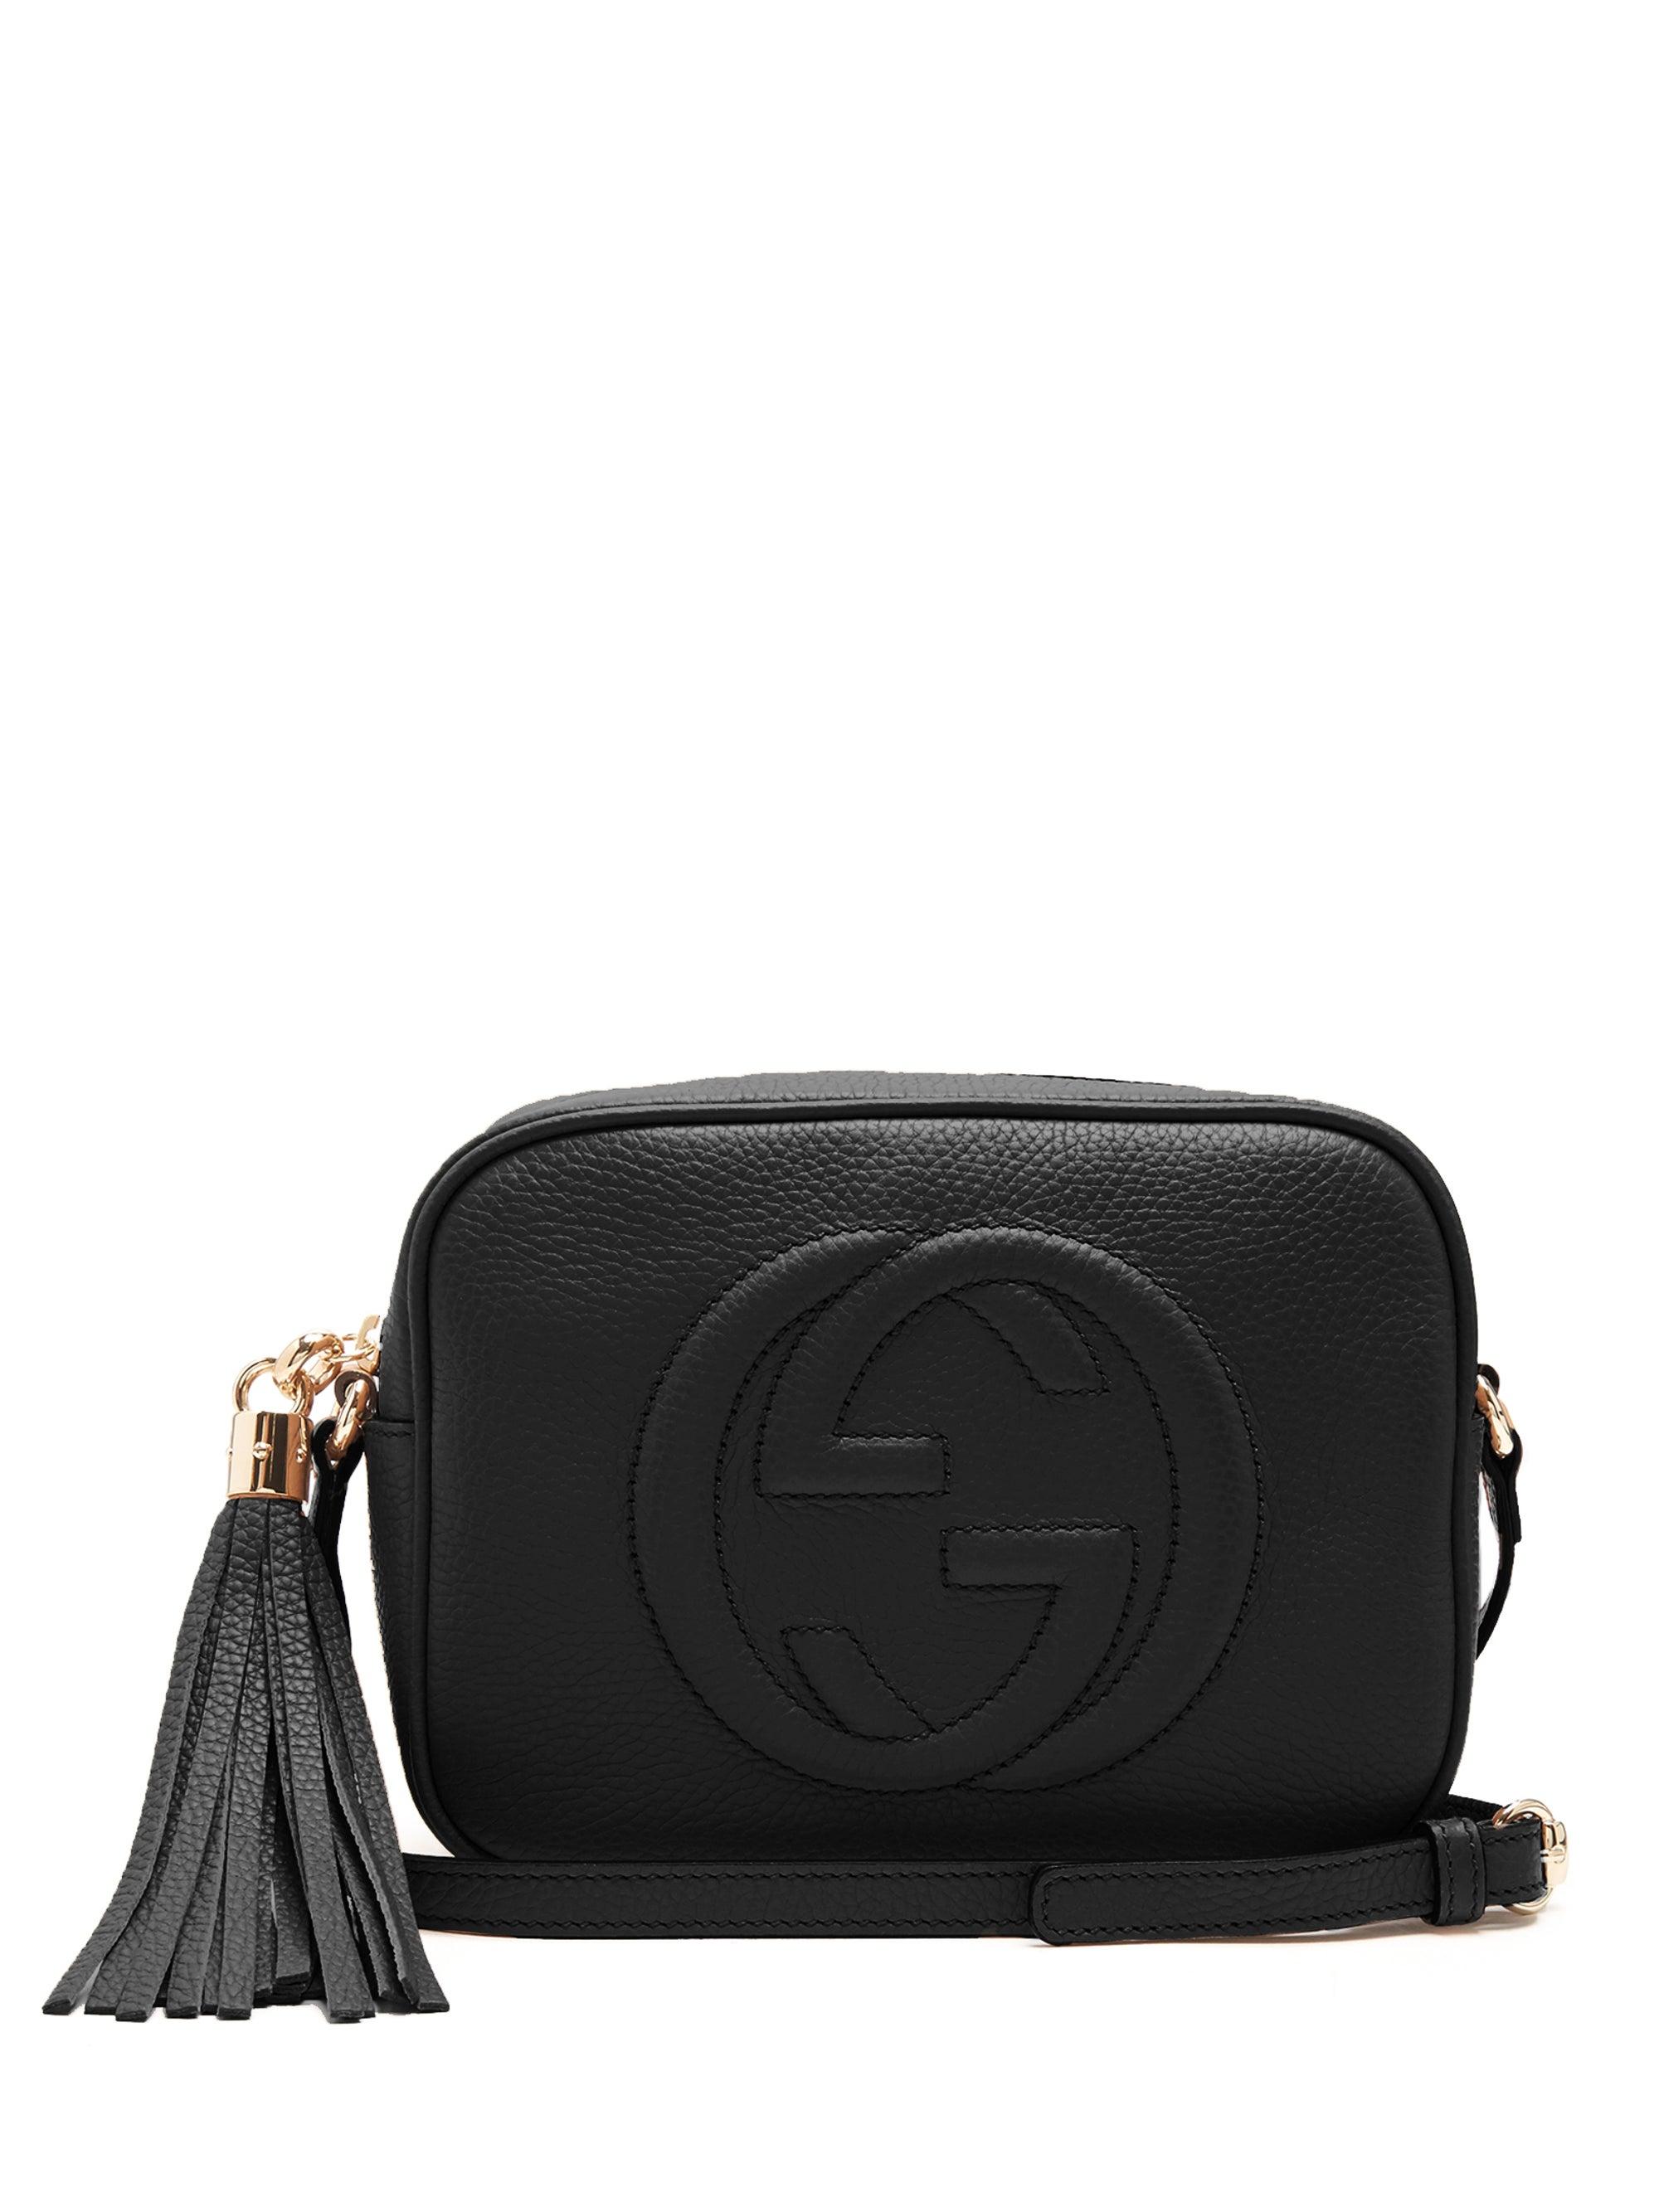 Gucci Soho Small Leather Disco Bag in Black Leather (Black) - Save 6% ...